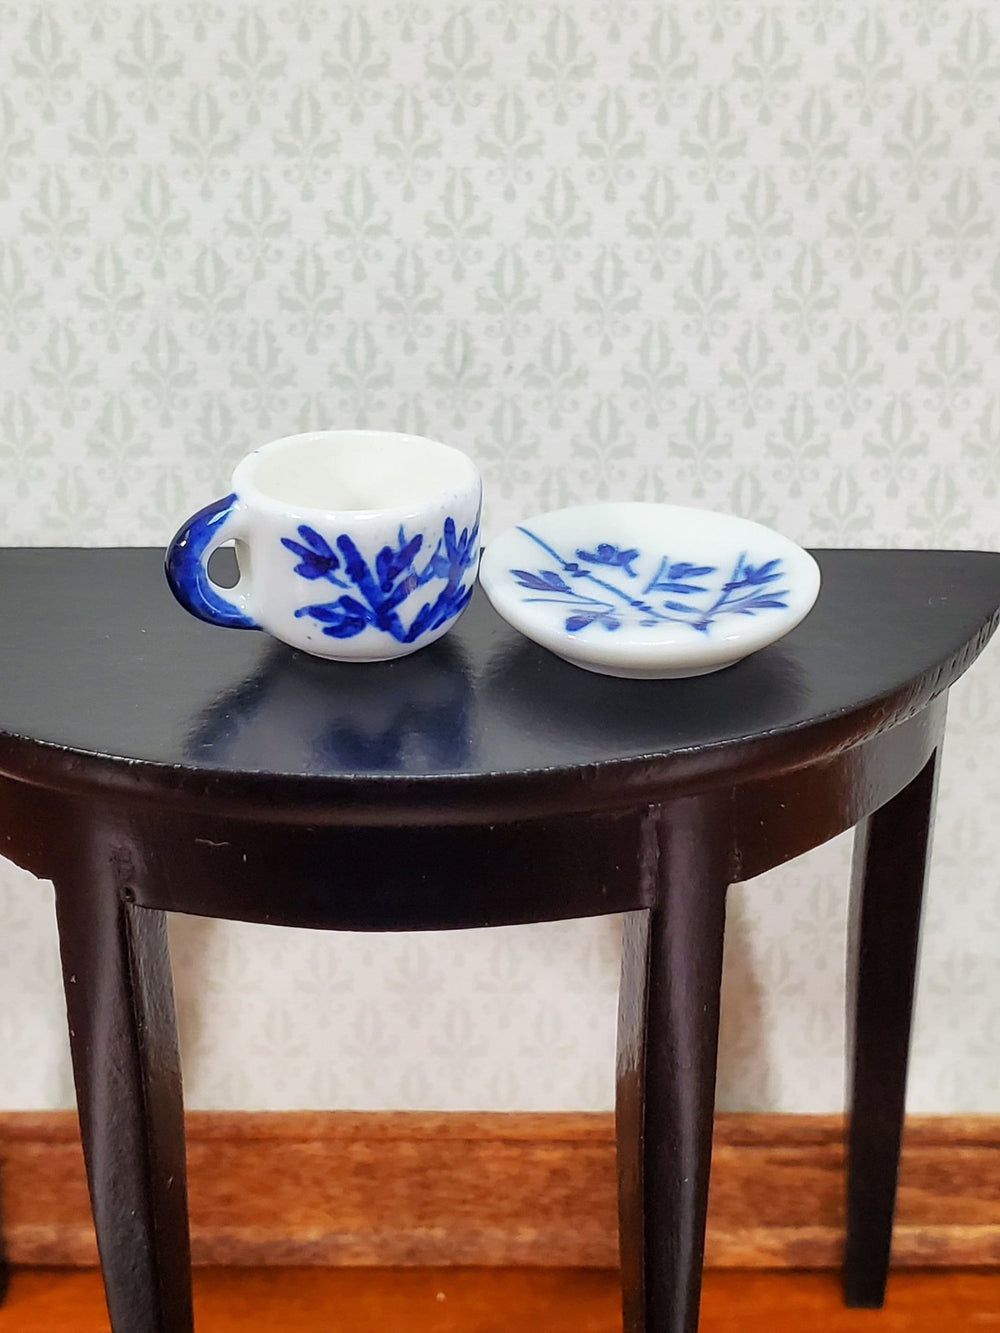 Dollhouse Coffee Mug Cup with Saucer Blue & White 1:6 Scale Miniature Kitchen Dishes - Miniature Crush